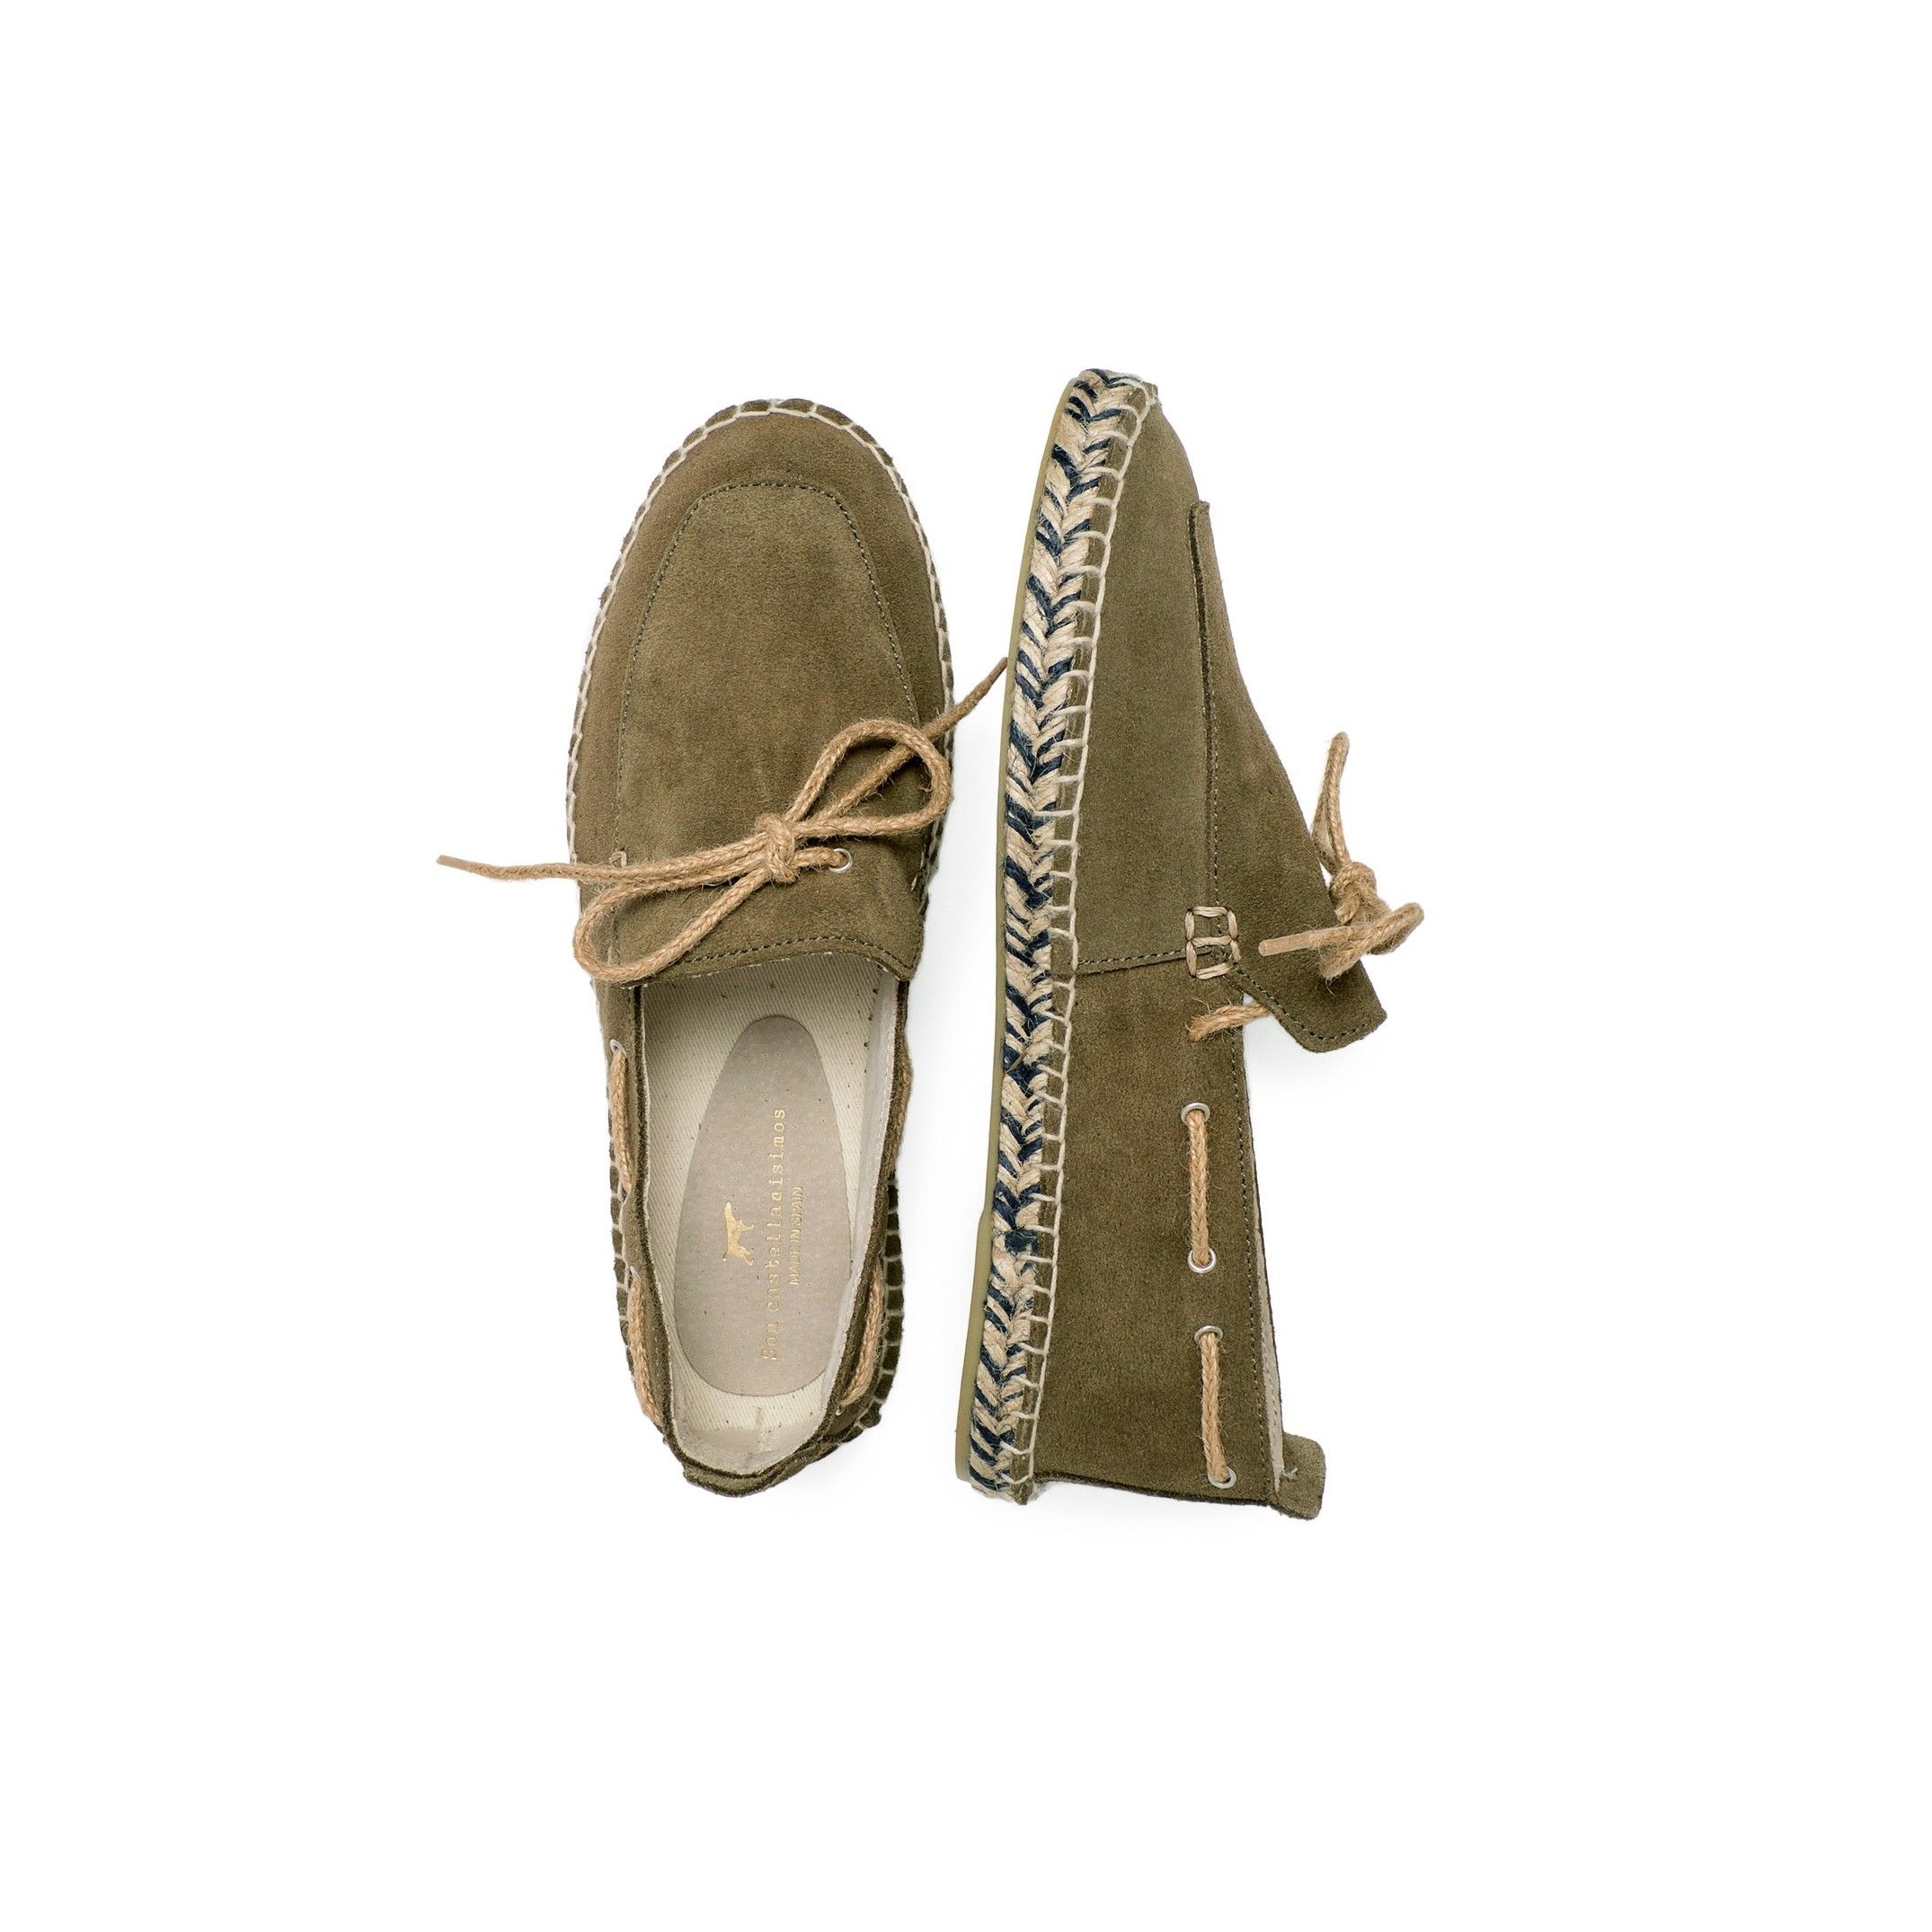 Flat espadrilles with bow, by Son Castellanisimos. Upper made of cowhide leather. Inner made of cowhide leather. Closure: laces. Inner lining and insole: cowhide leather and  textile. Sole material: synthetic and non-slip. Heel height: 1,5 cm. Designed and manufactured in Spain.